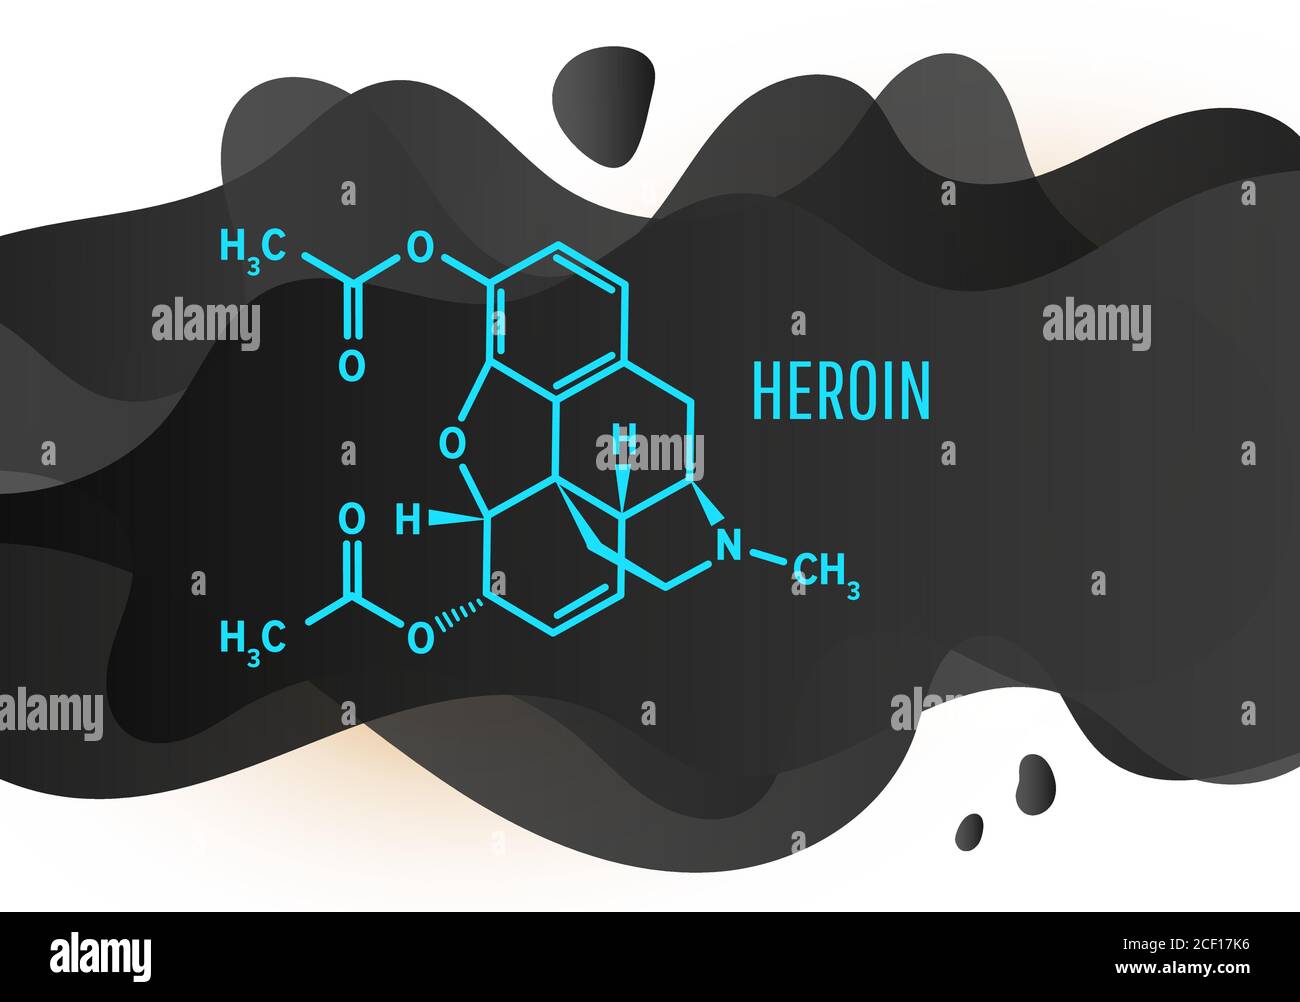 Heroin structural chemical formula with black liquid fluid shapes on a white background Stock Vector